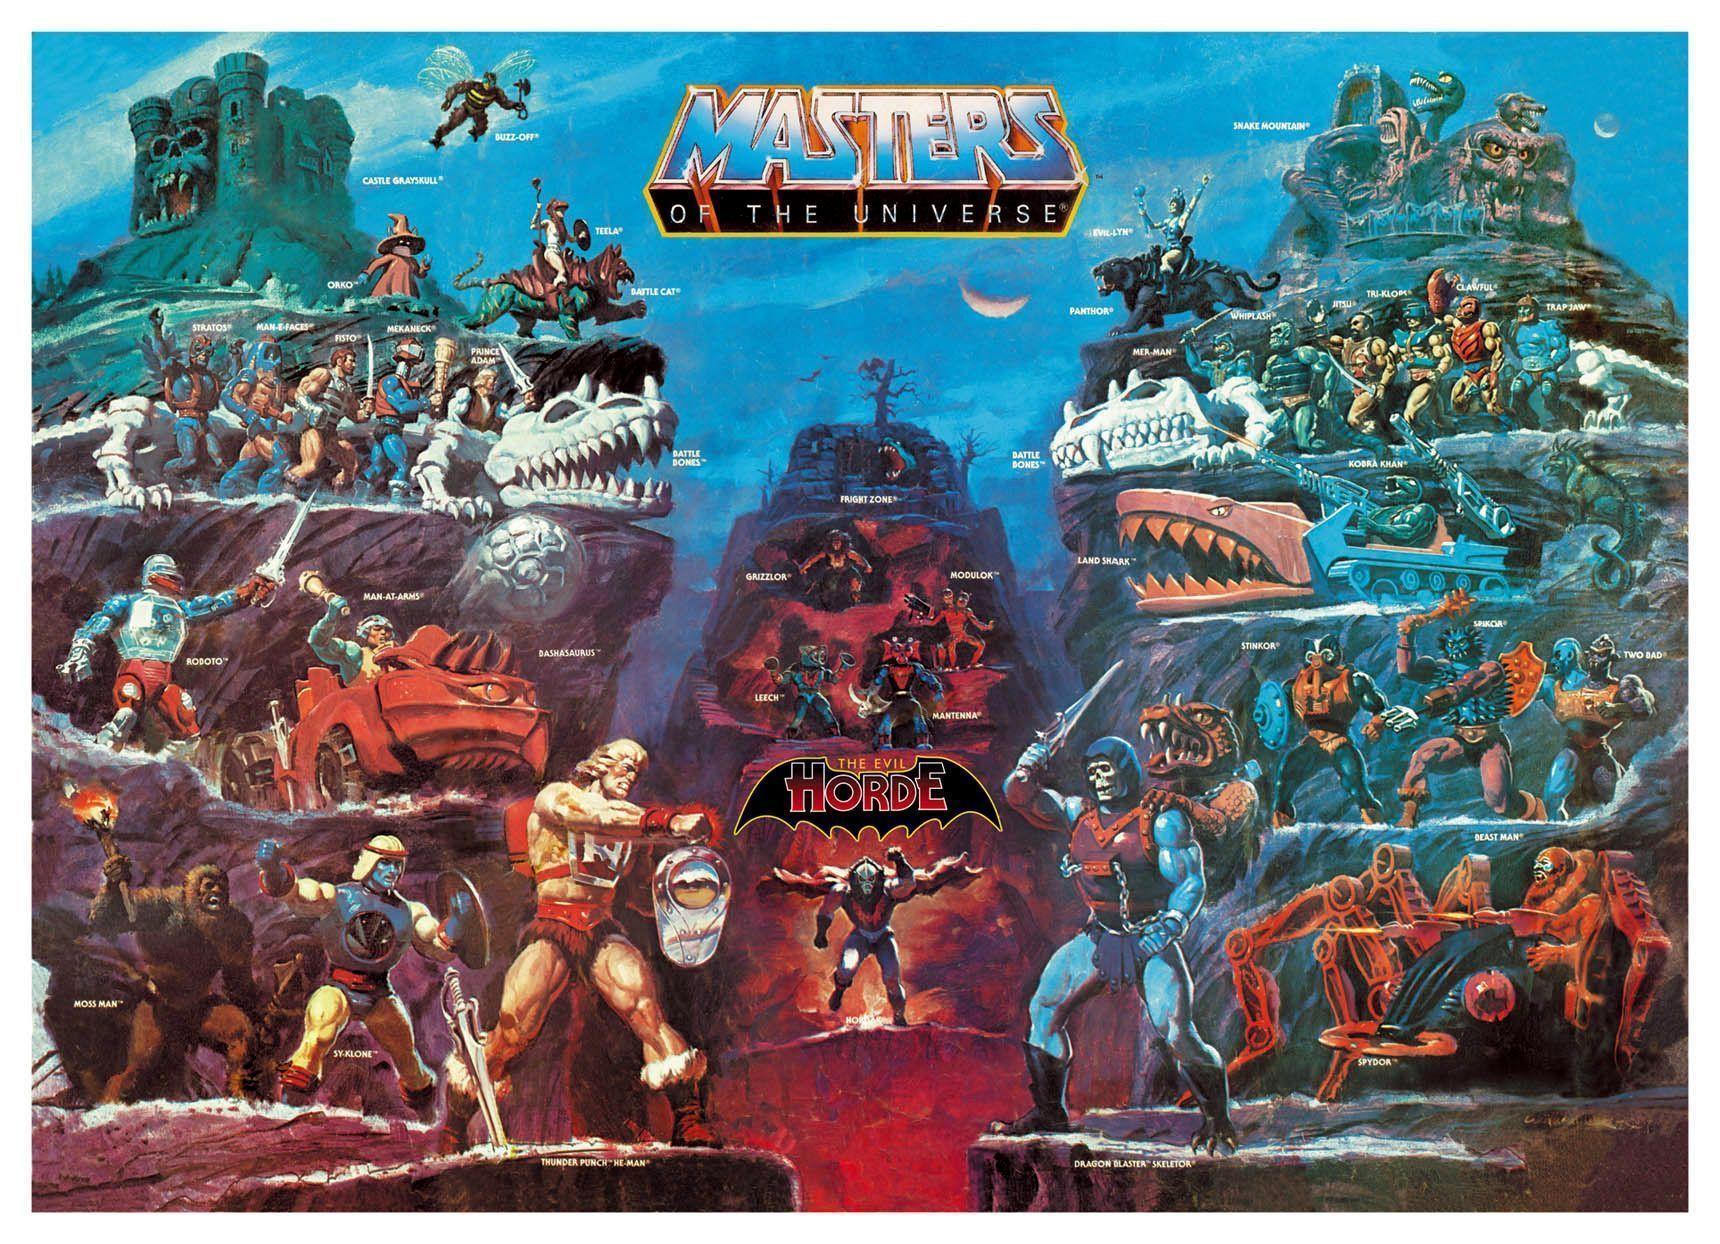 Monday Art Attack: He Man And The Masters Of The Universe